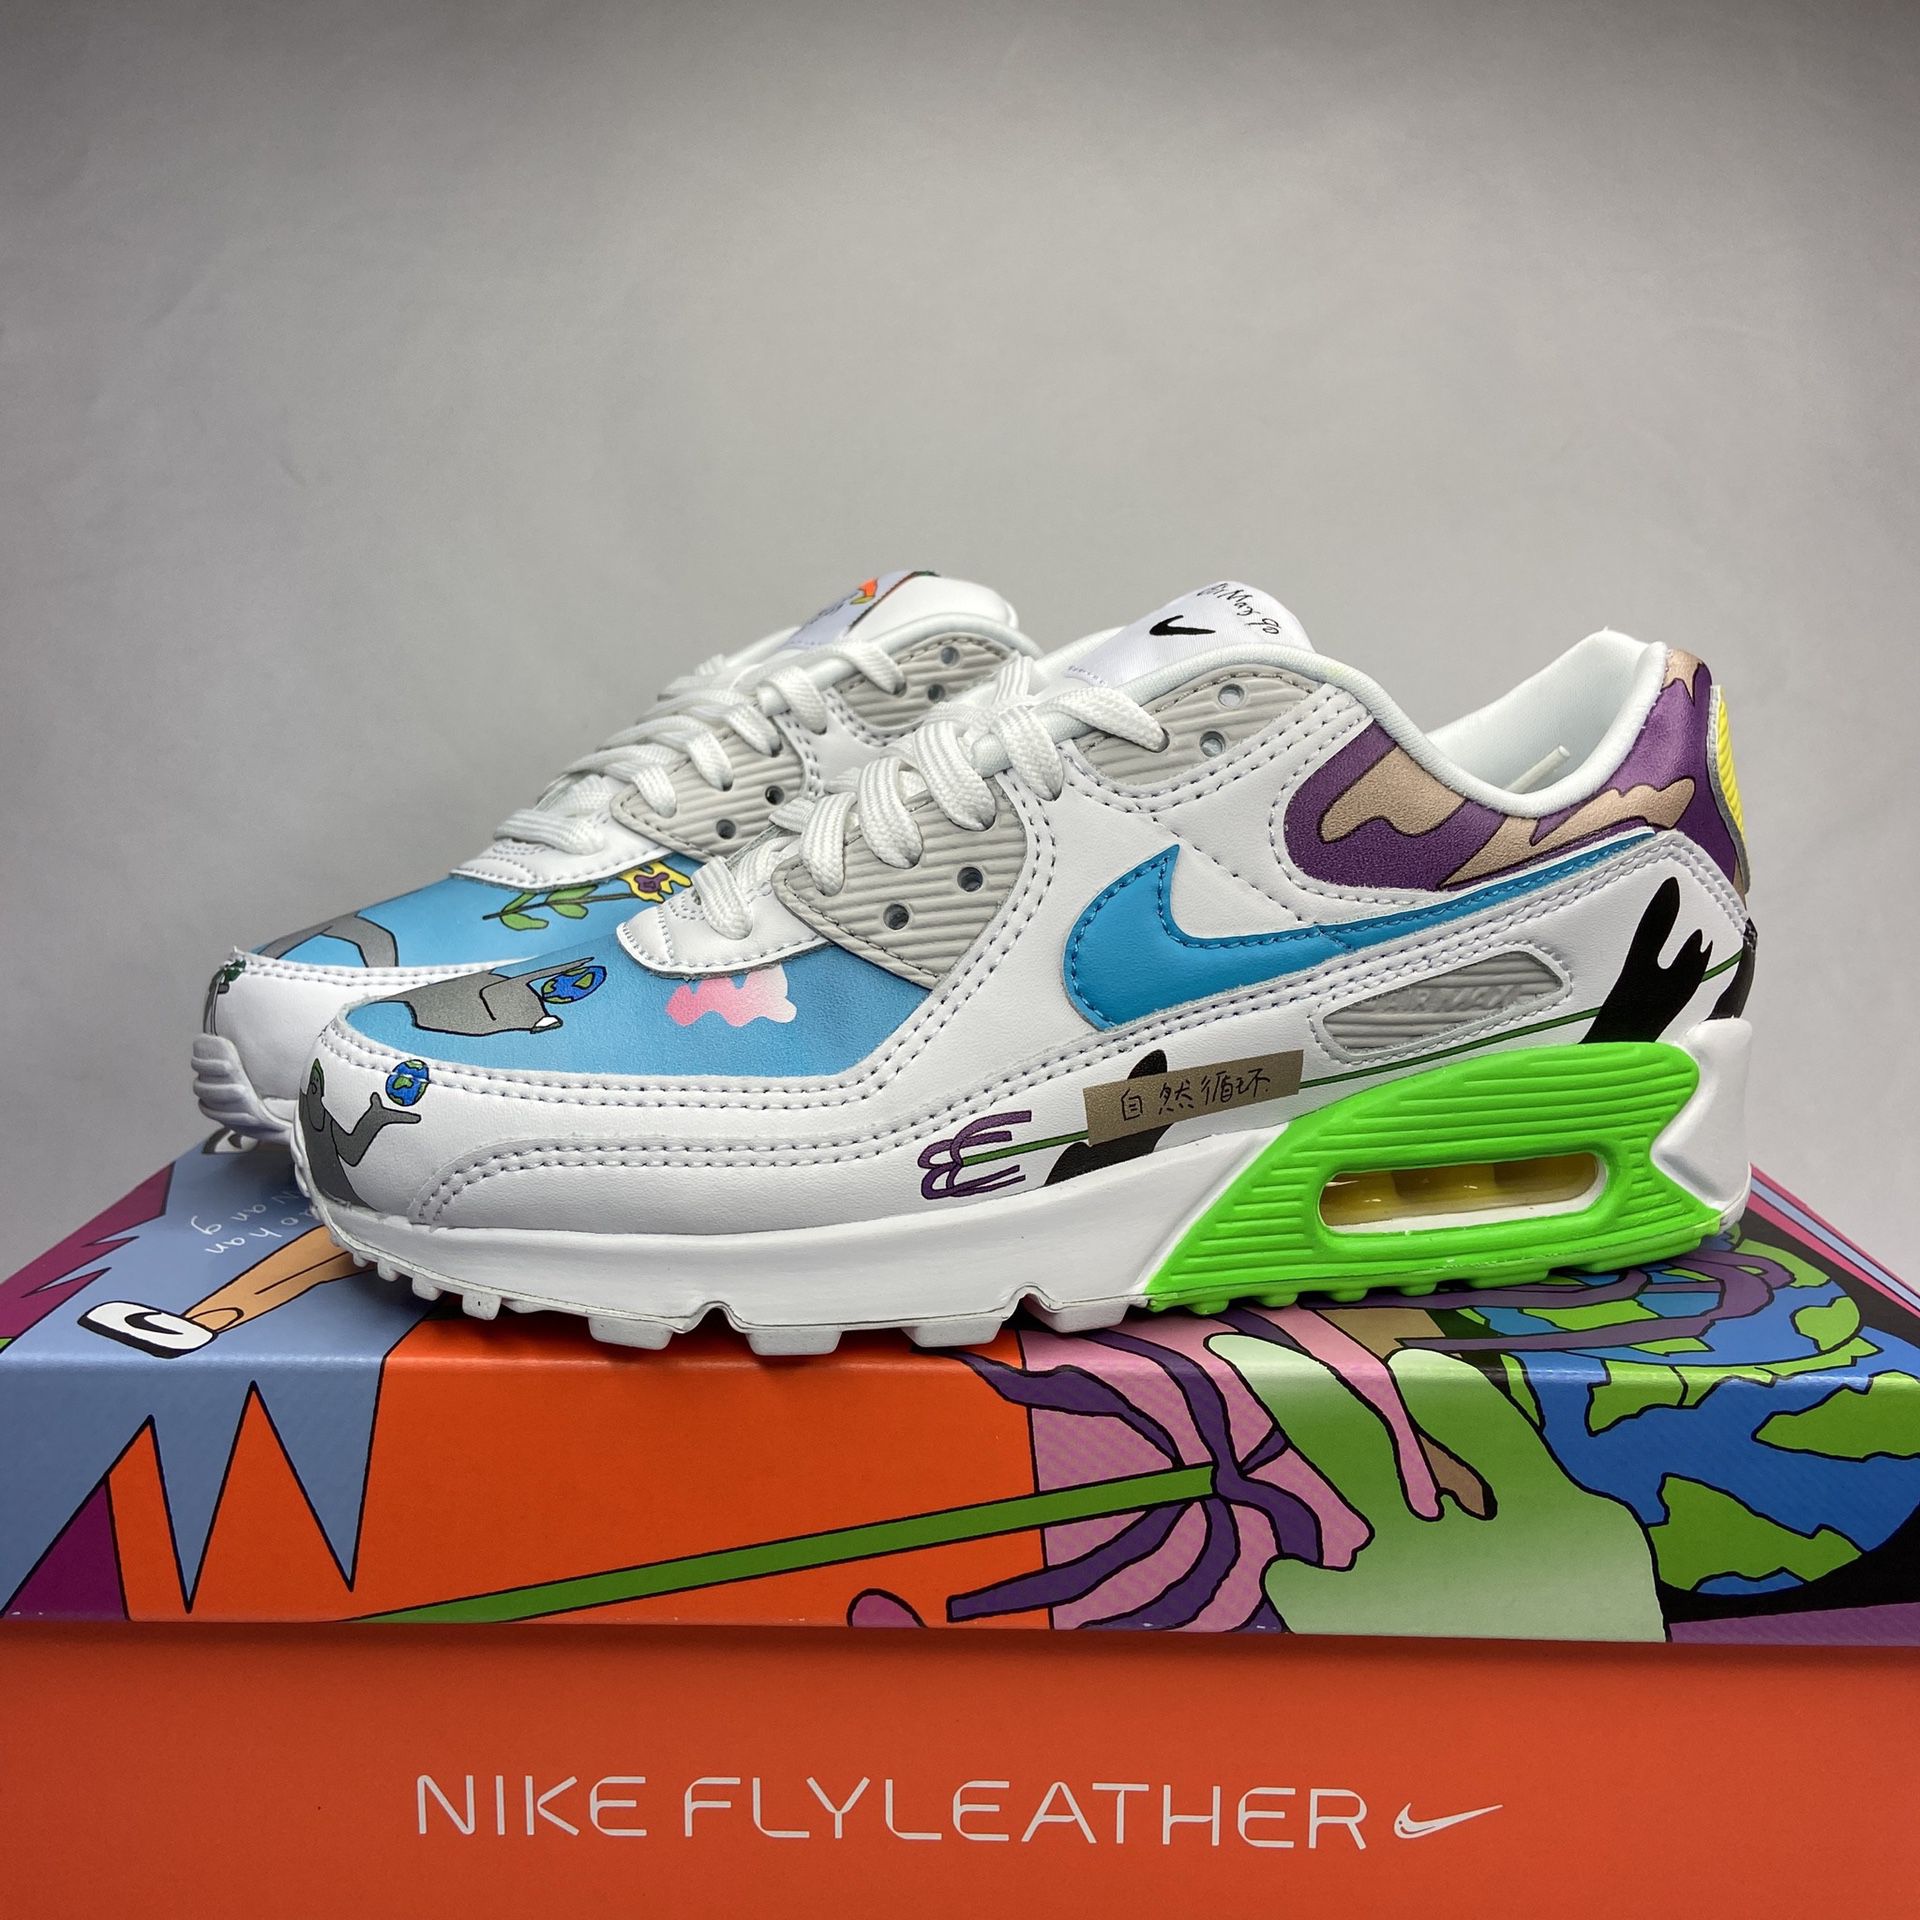 Nike Air Max 90 Flyleather Size M 6 W 7.5 Ruohan Wang Artist Series